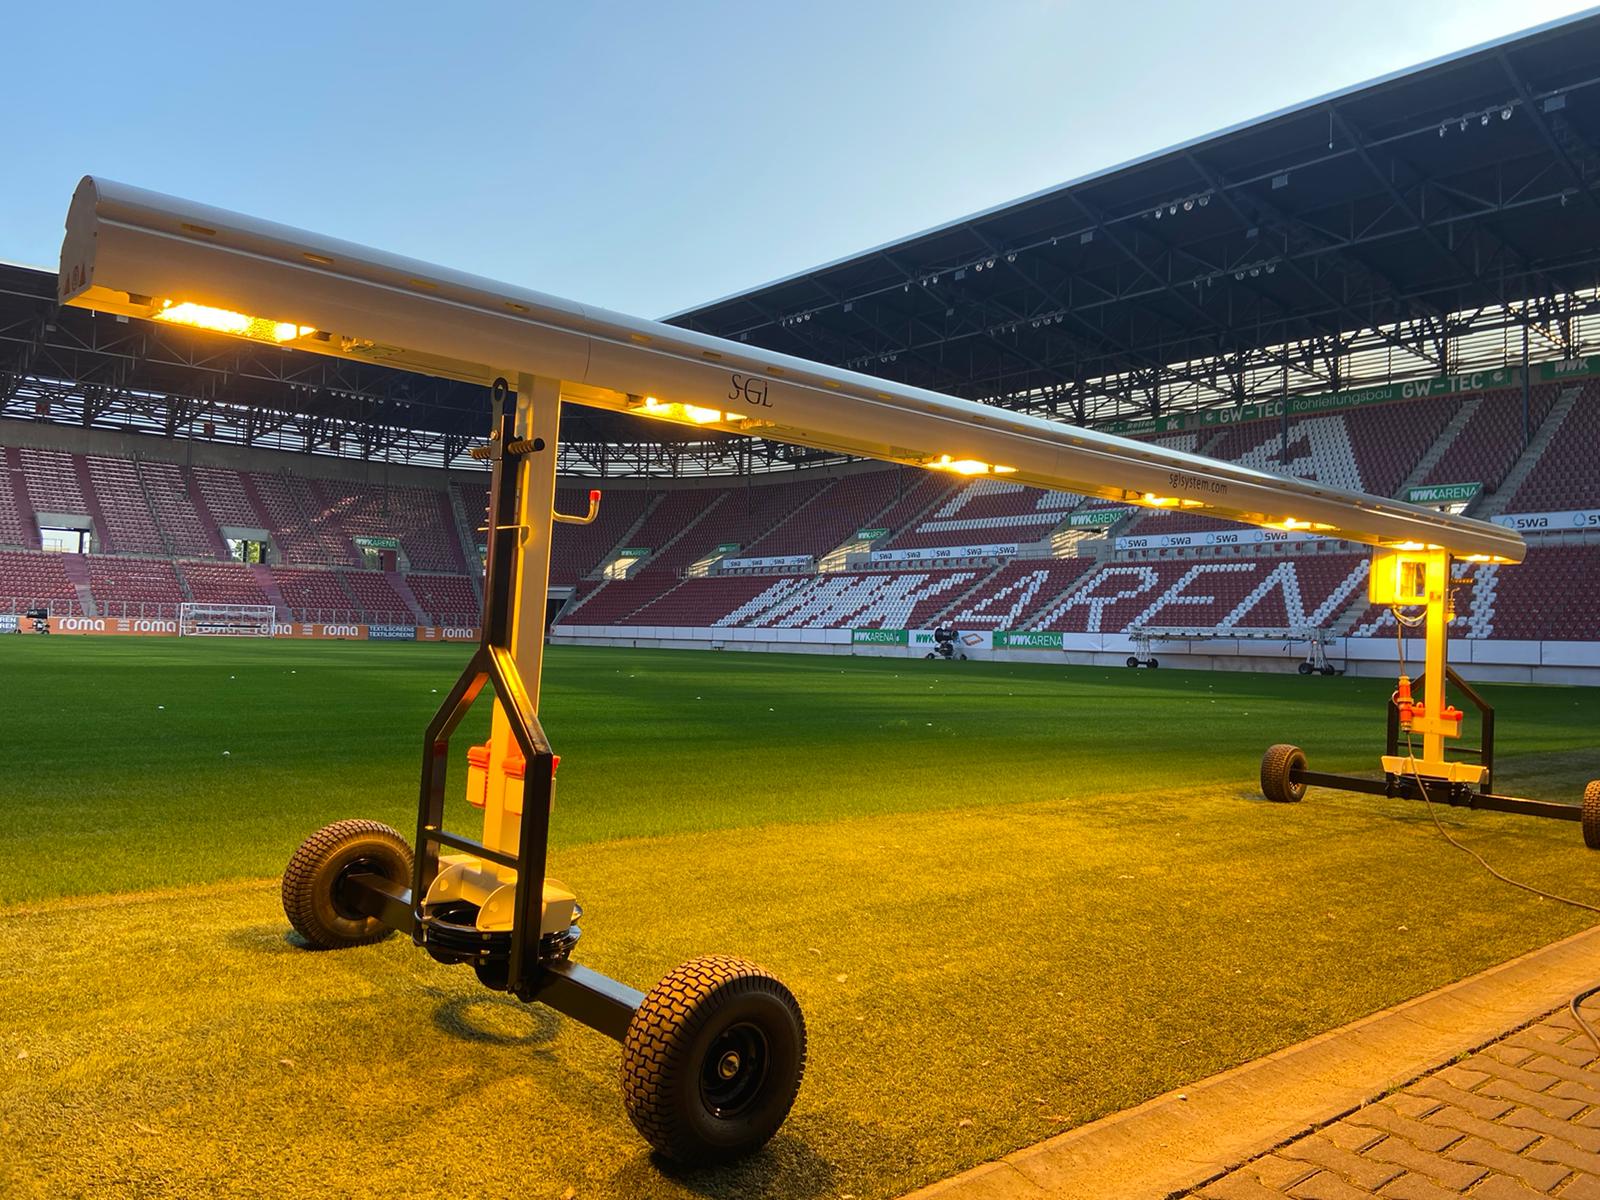 The SGL BU50 HPS grow lighting unit on the WWK Arena pitch.